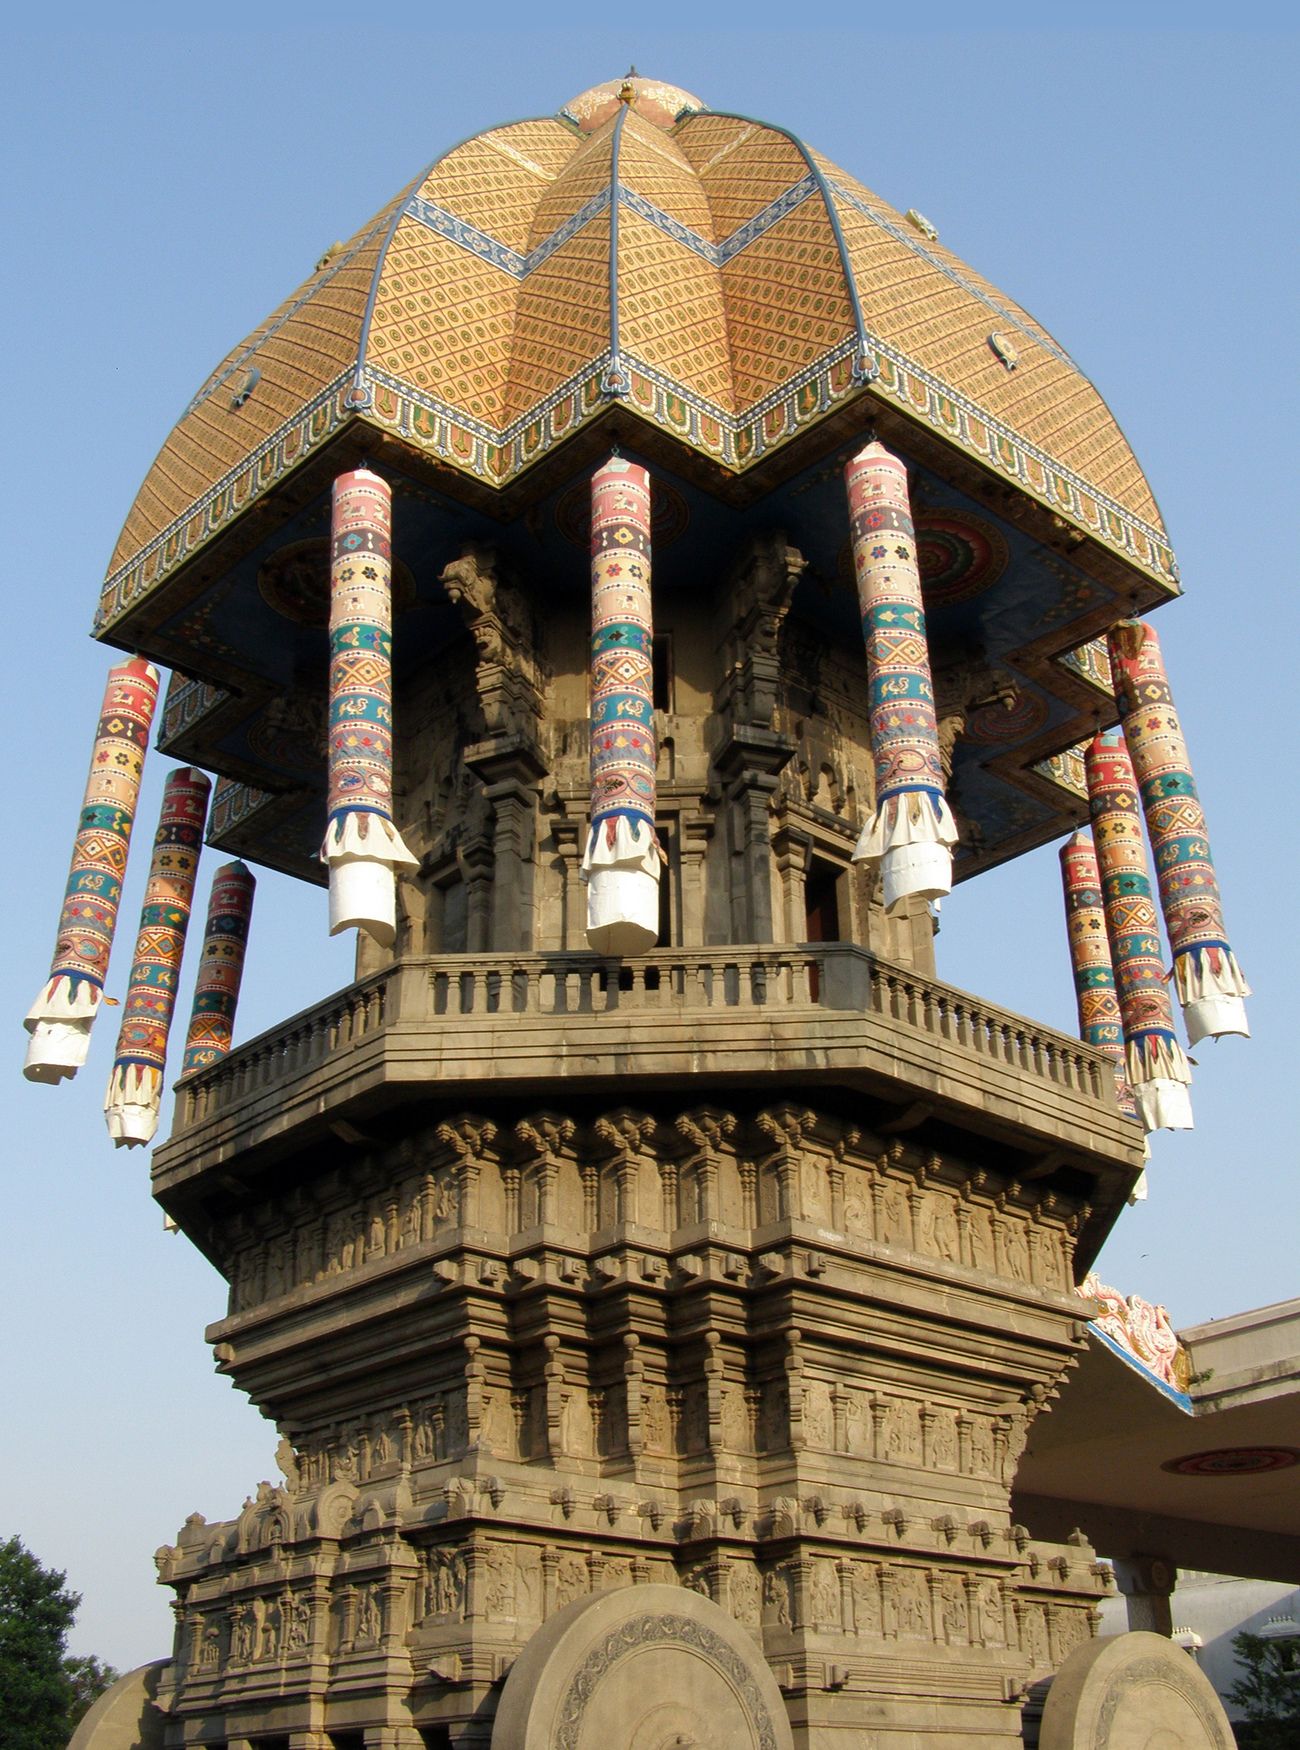 Thiruvalluvar, the revered Tamil philosopher poet and saint, is honored at this unique temple with its chariot-like base carved in stone